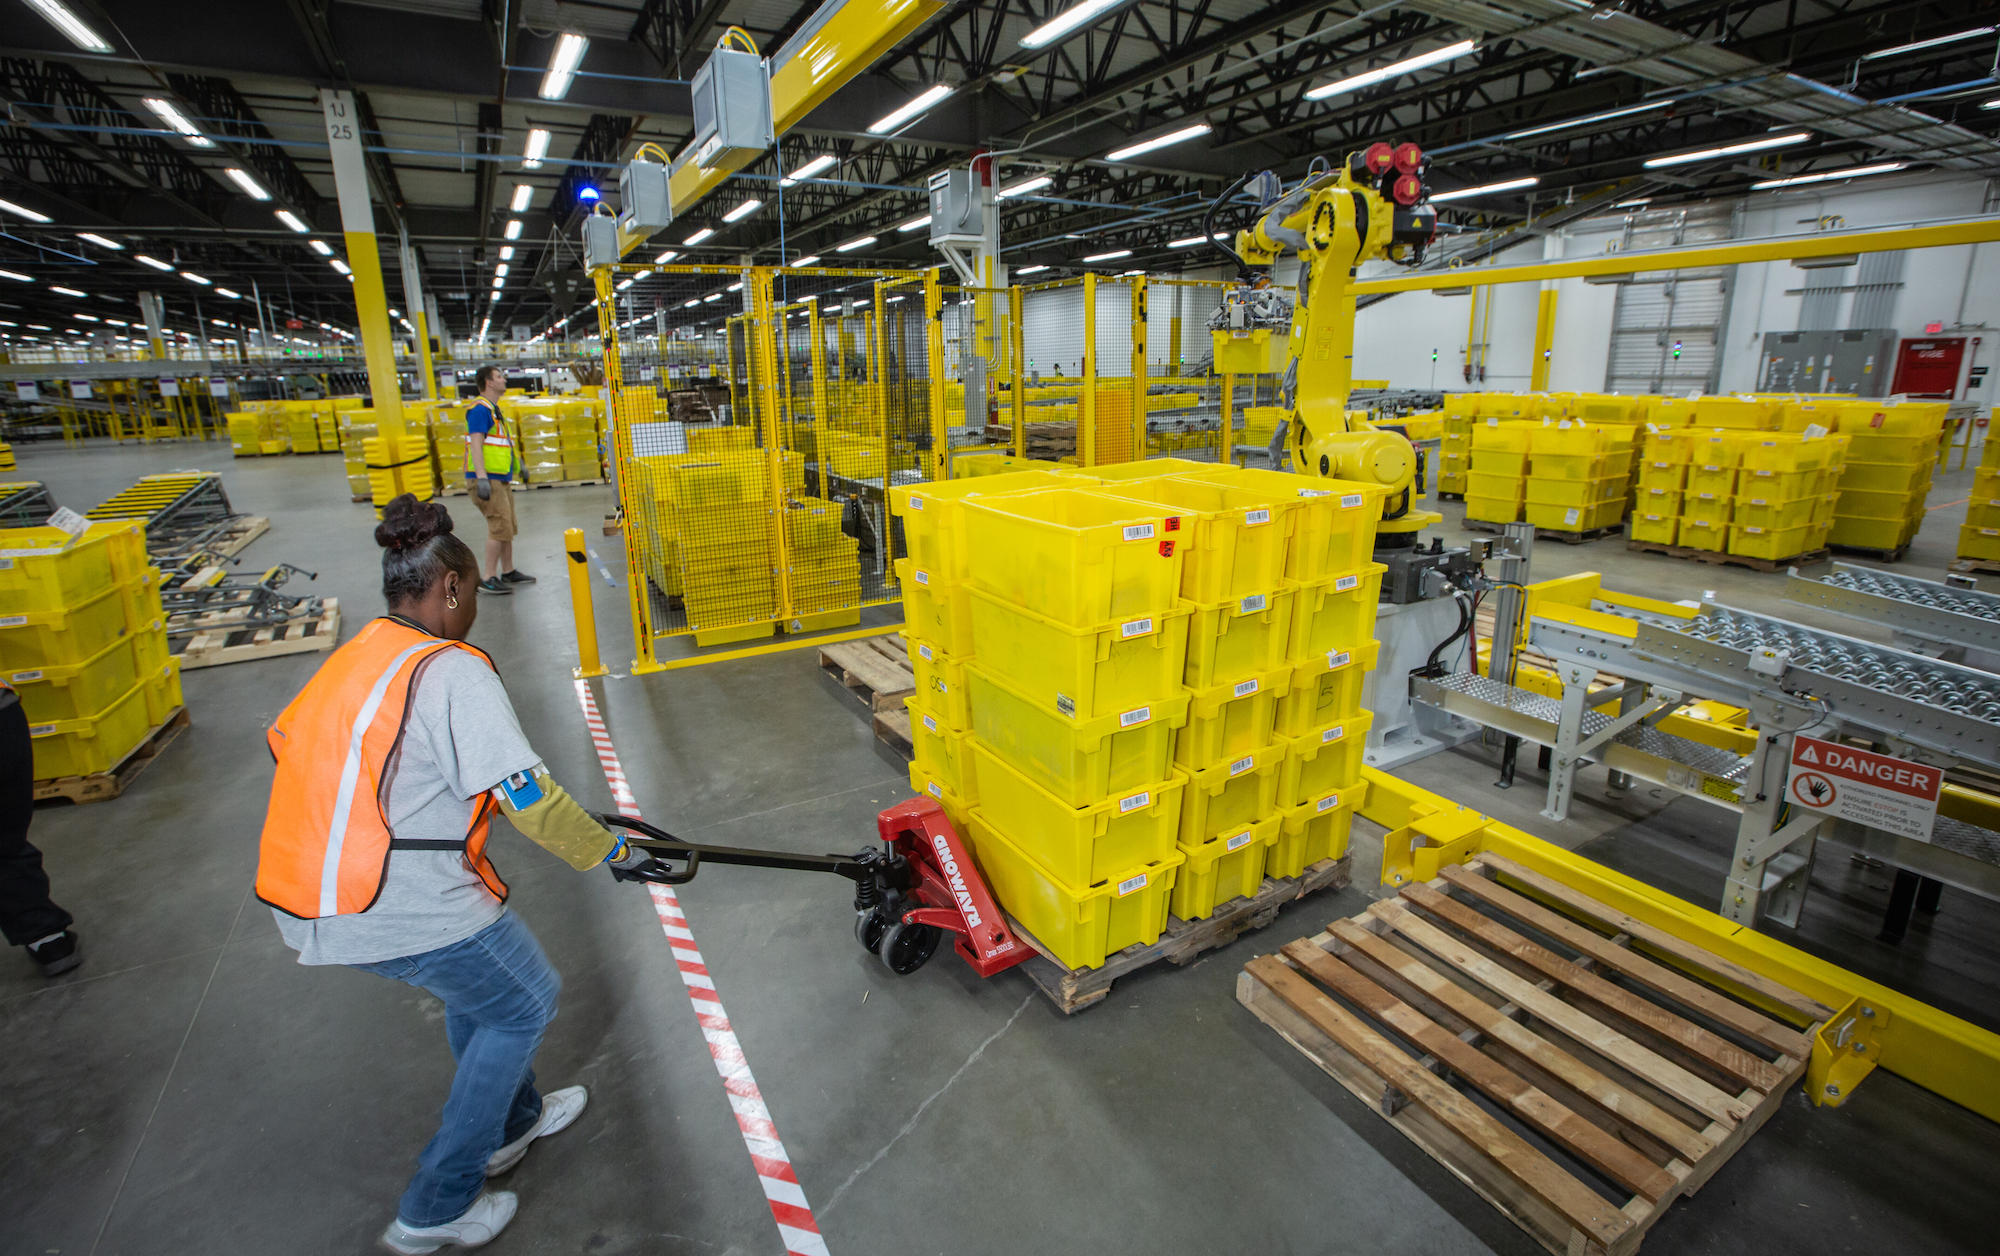 Warehouse Employment as a Driver of Inequality in the Inland Empire: The Experiences of Young Amazon Warehouse Workers